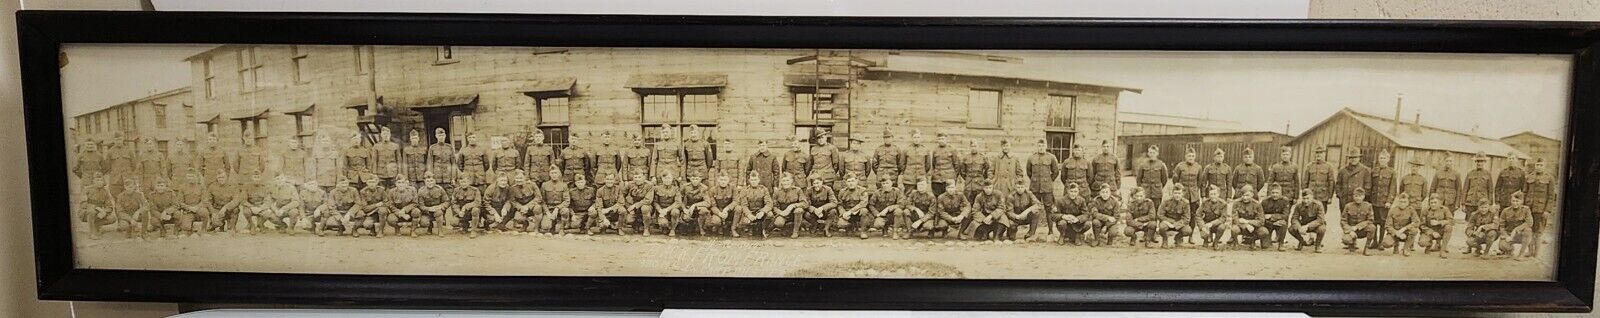 Post WW1 Military Panoramic Photo 1919 Back From France 330 M.G BN Camp Custer